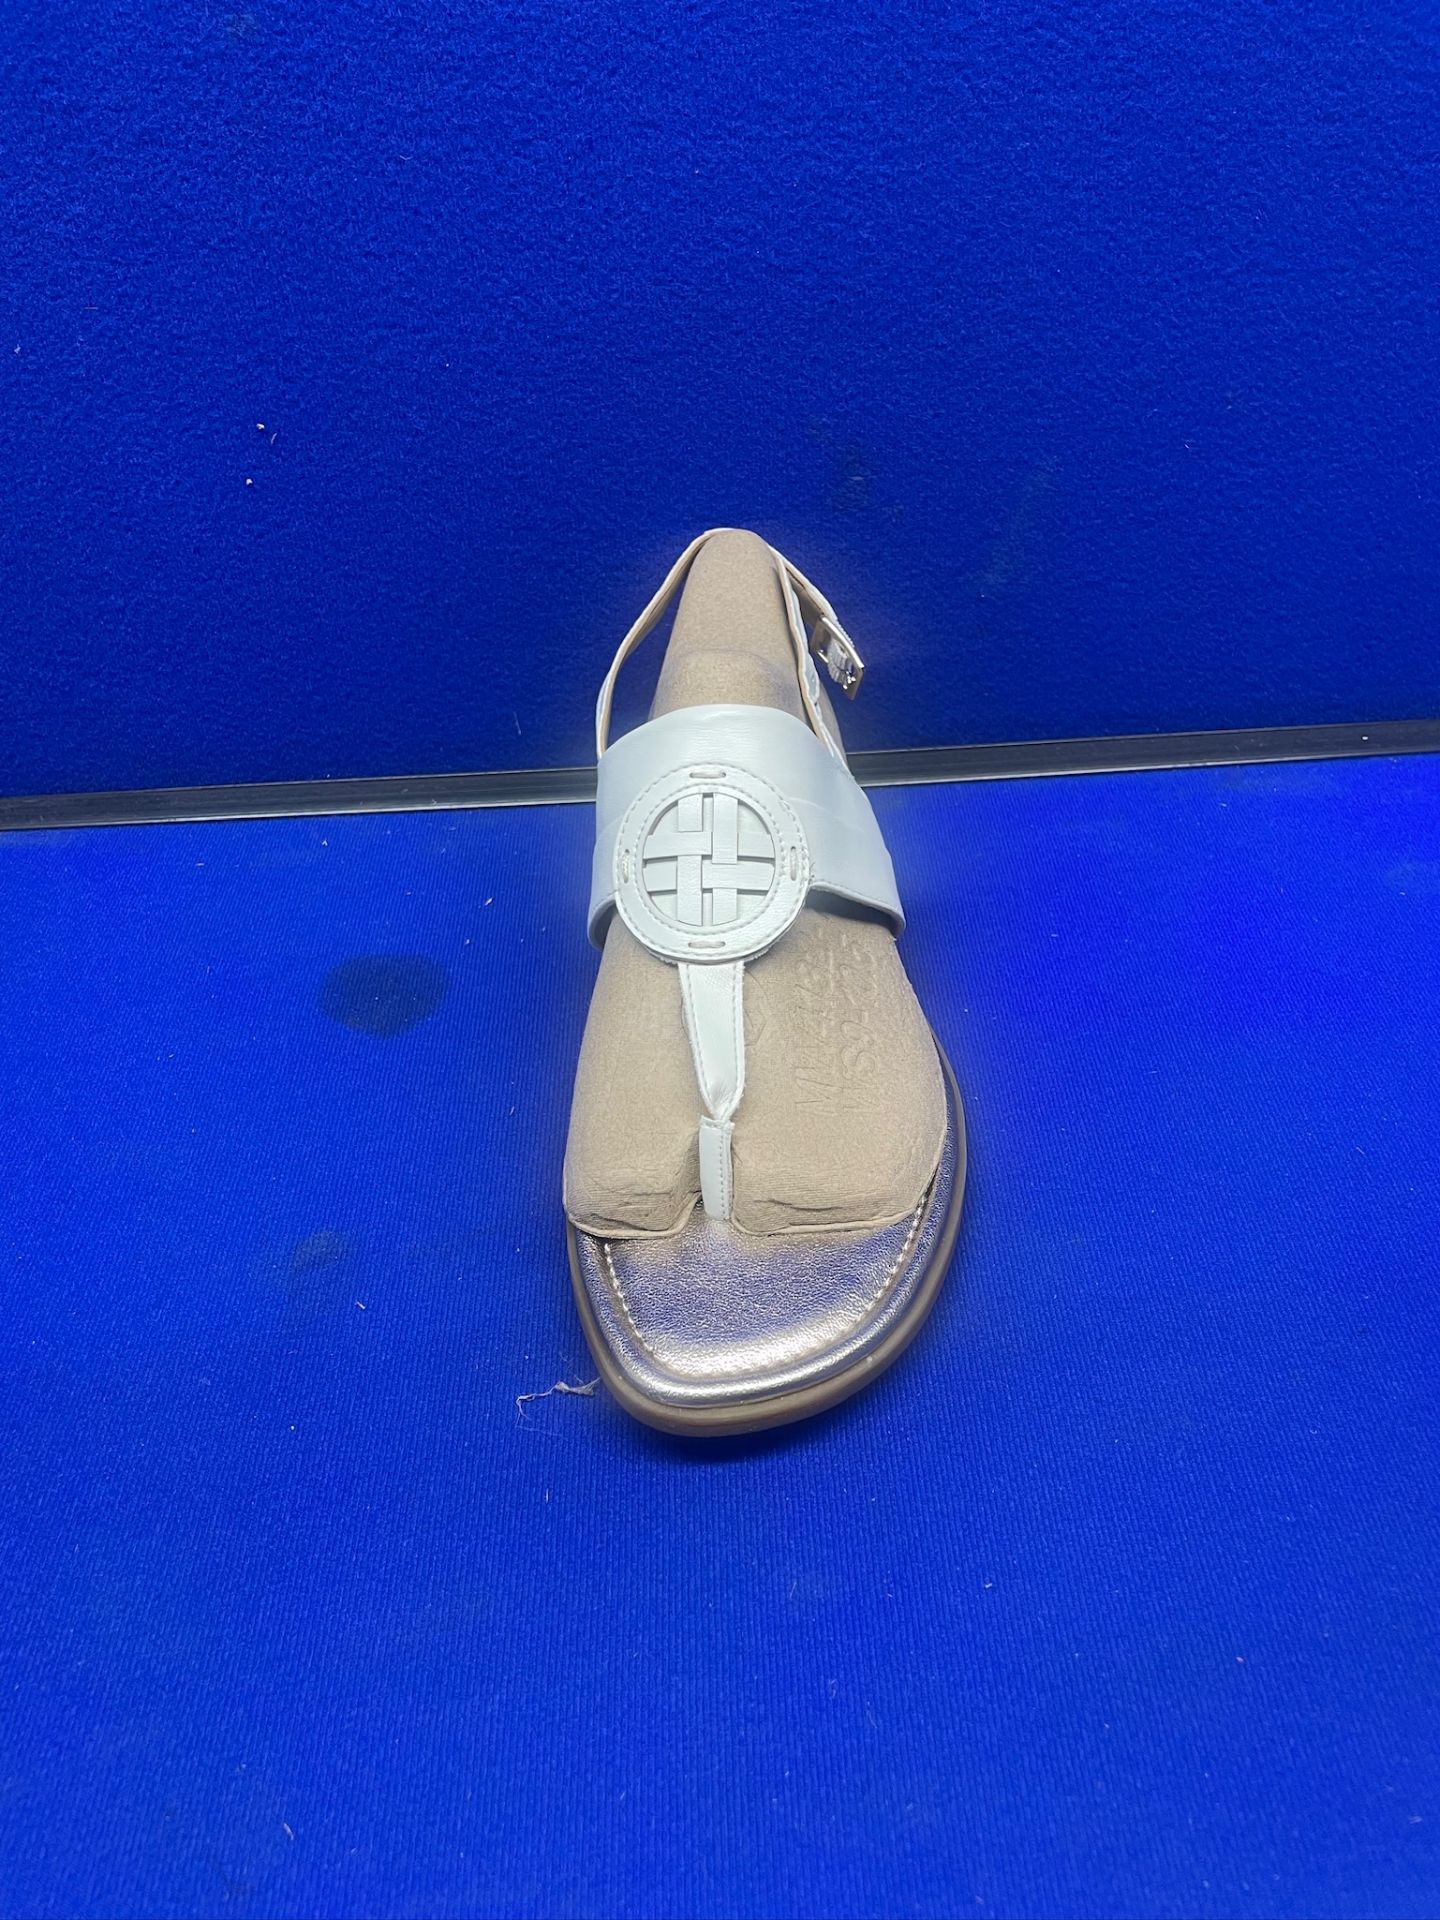 Pair of Clark's Ladies Sandals - White & Silver - Image 2 of 3